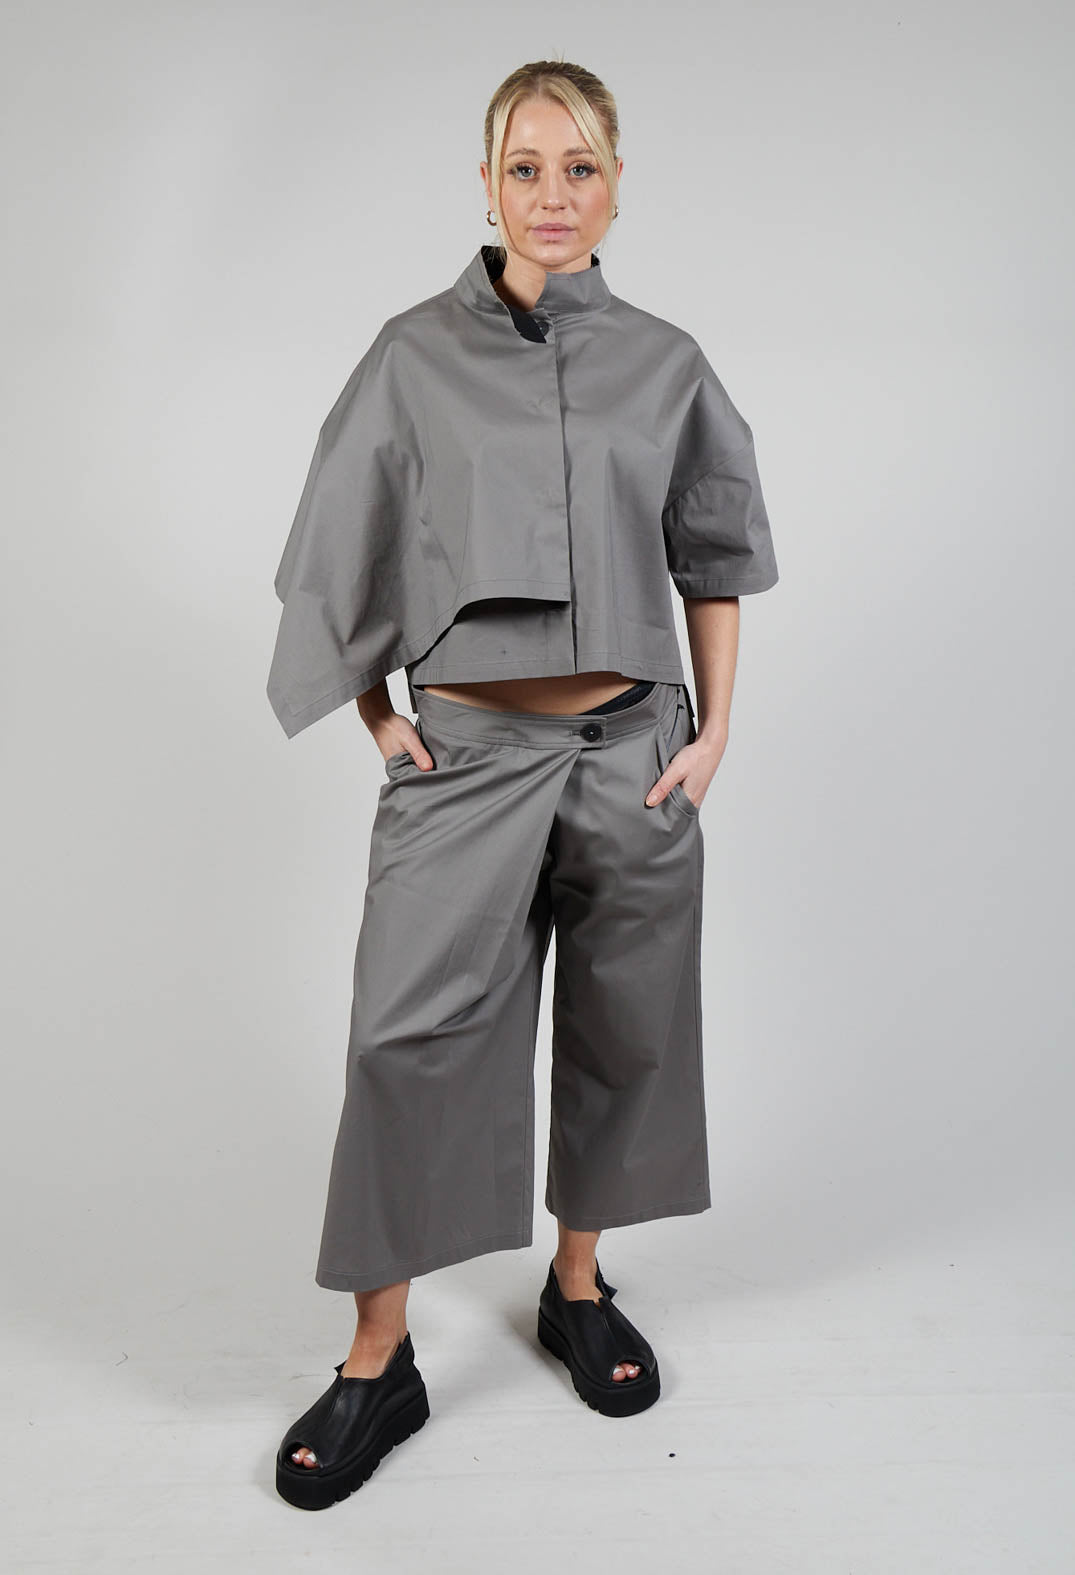 COSE Trousers in Grey Brown